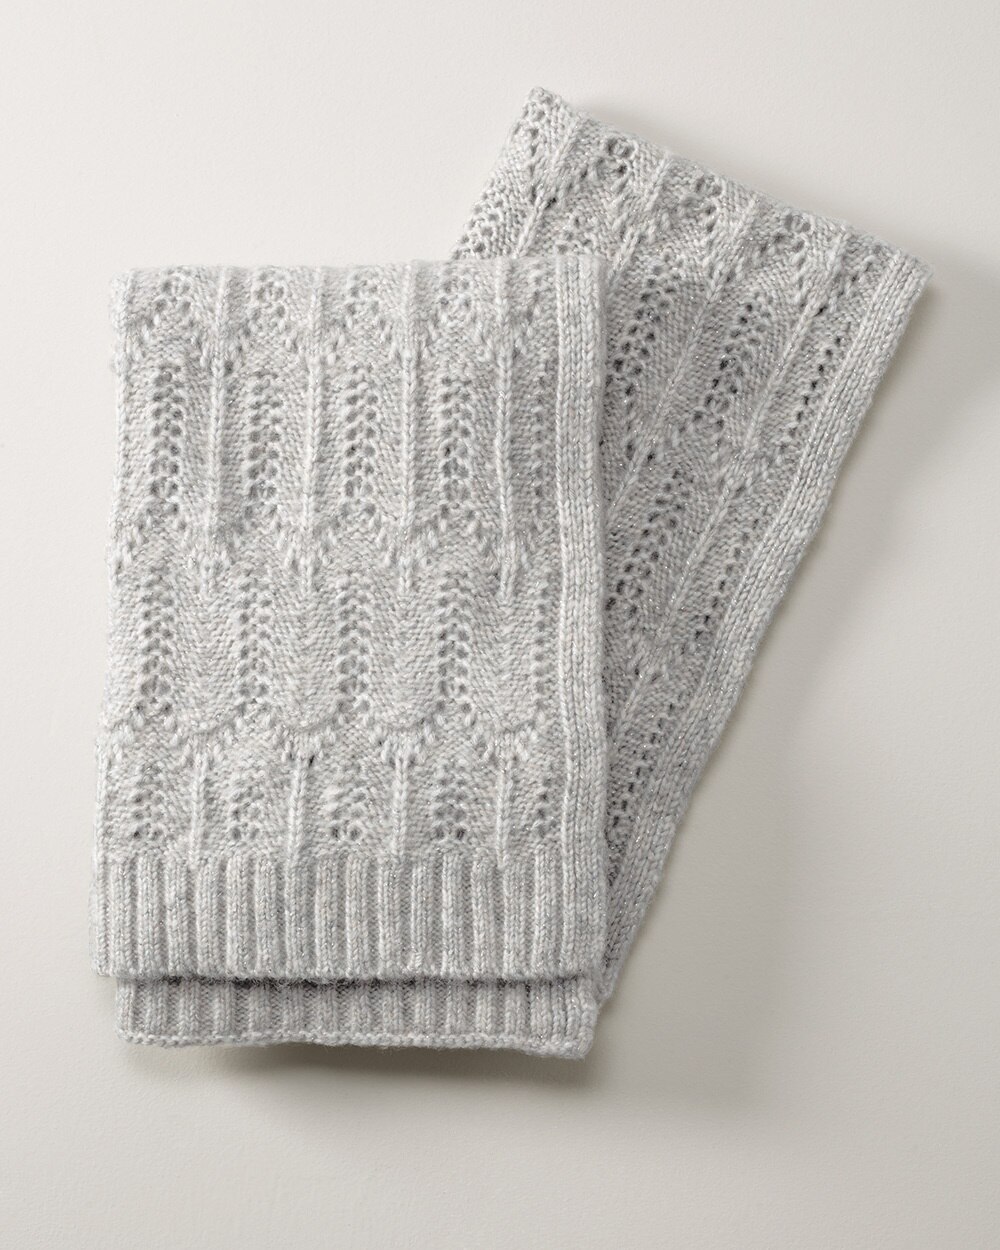 Pointelle Knit Scarf